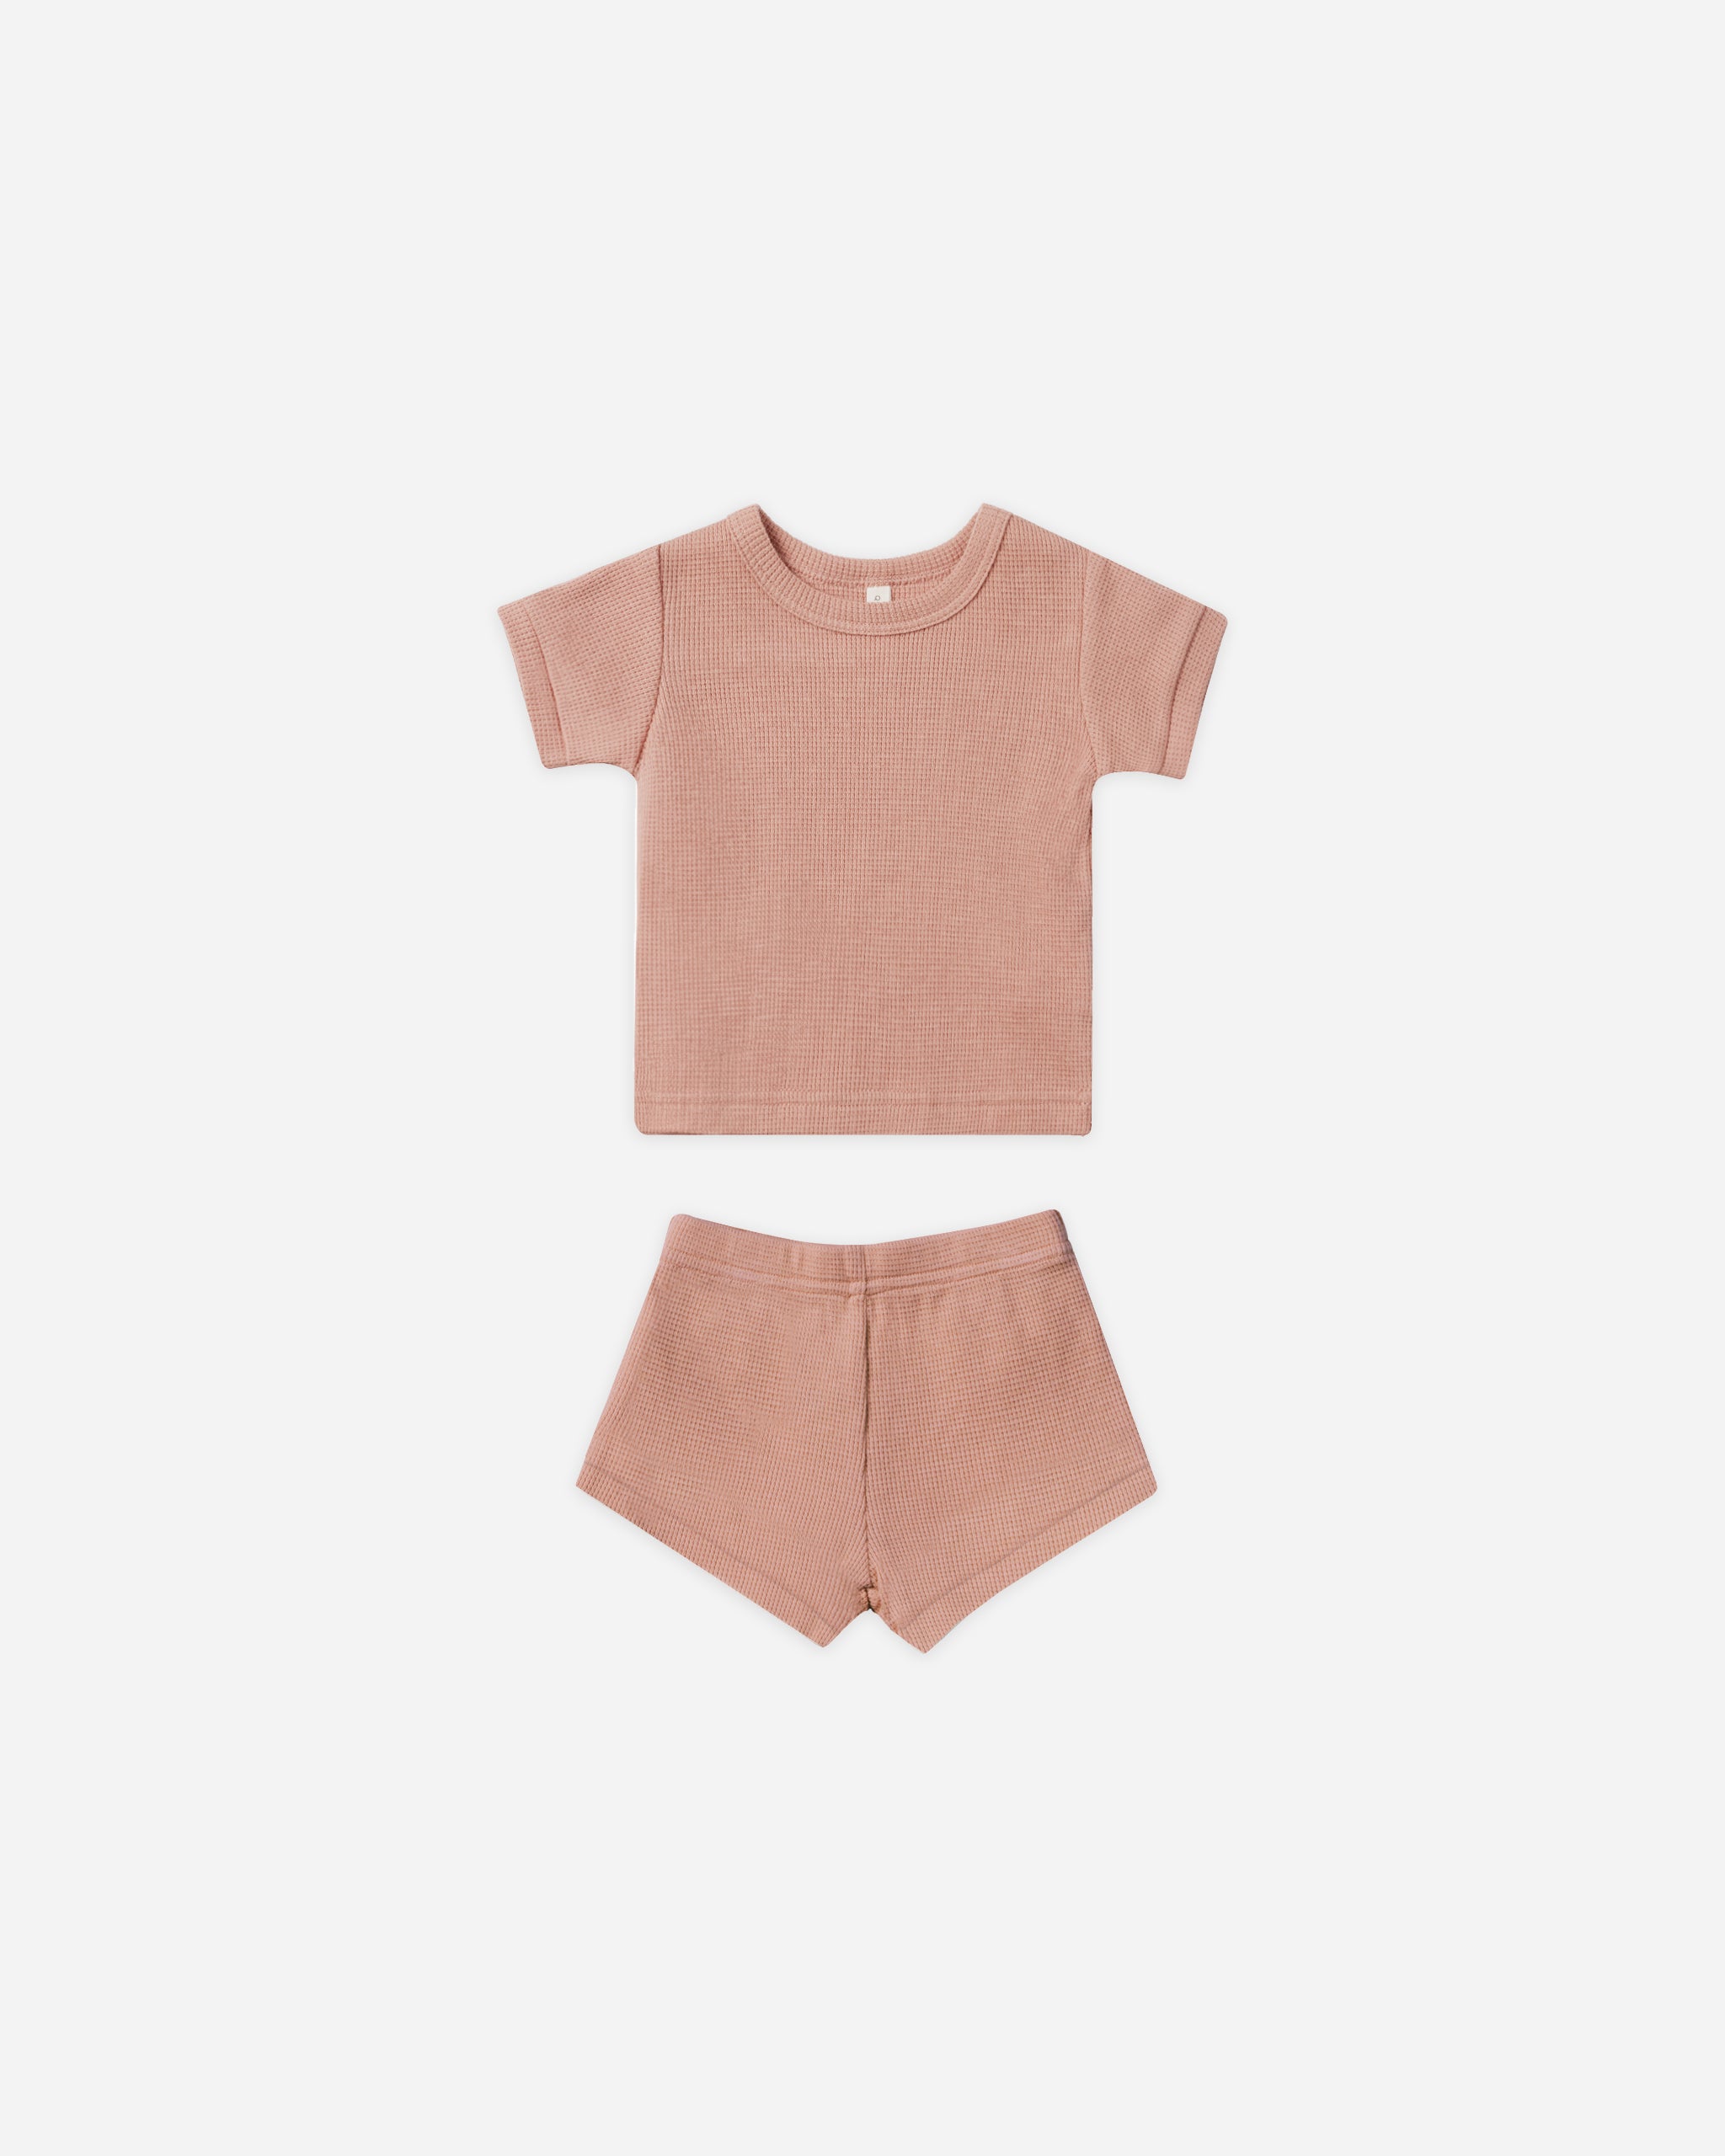 Waffle Shortie Set || Rose - Rylee + Cru | Kids Clothes | Trendy Baby Clothes | Modern Infant Outfits |